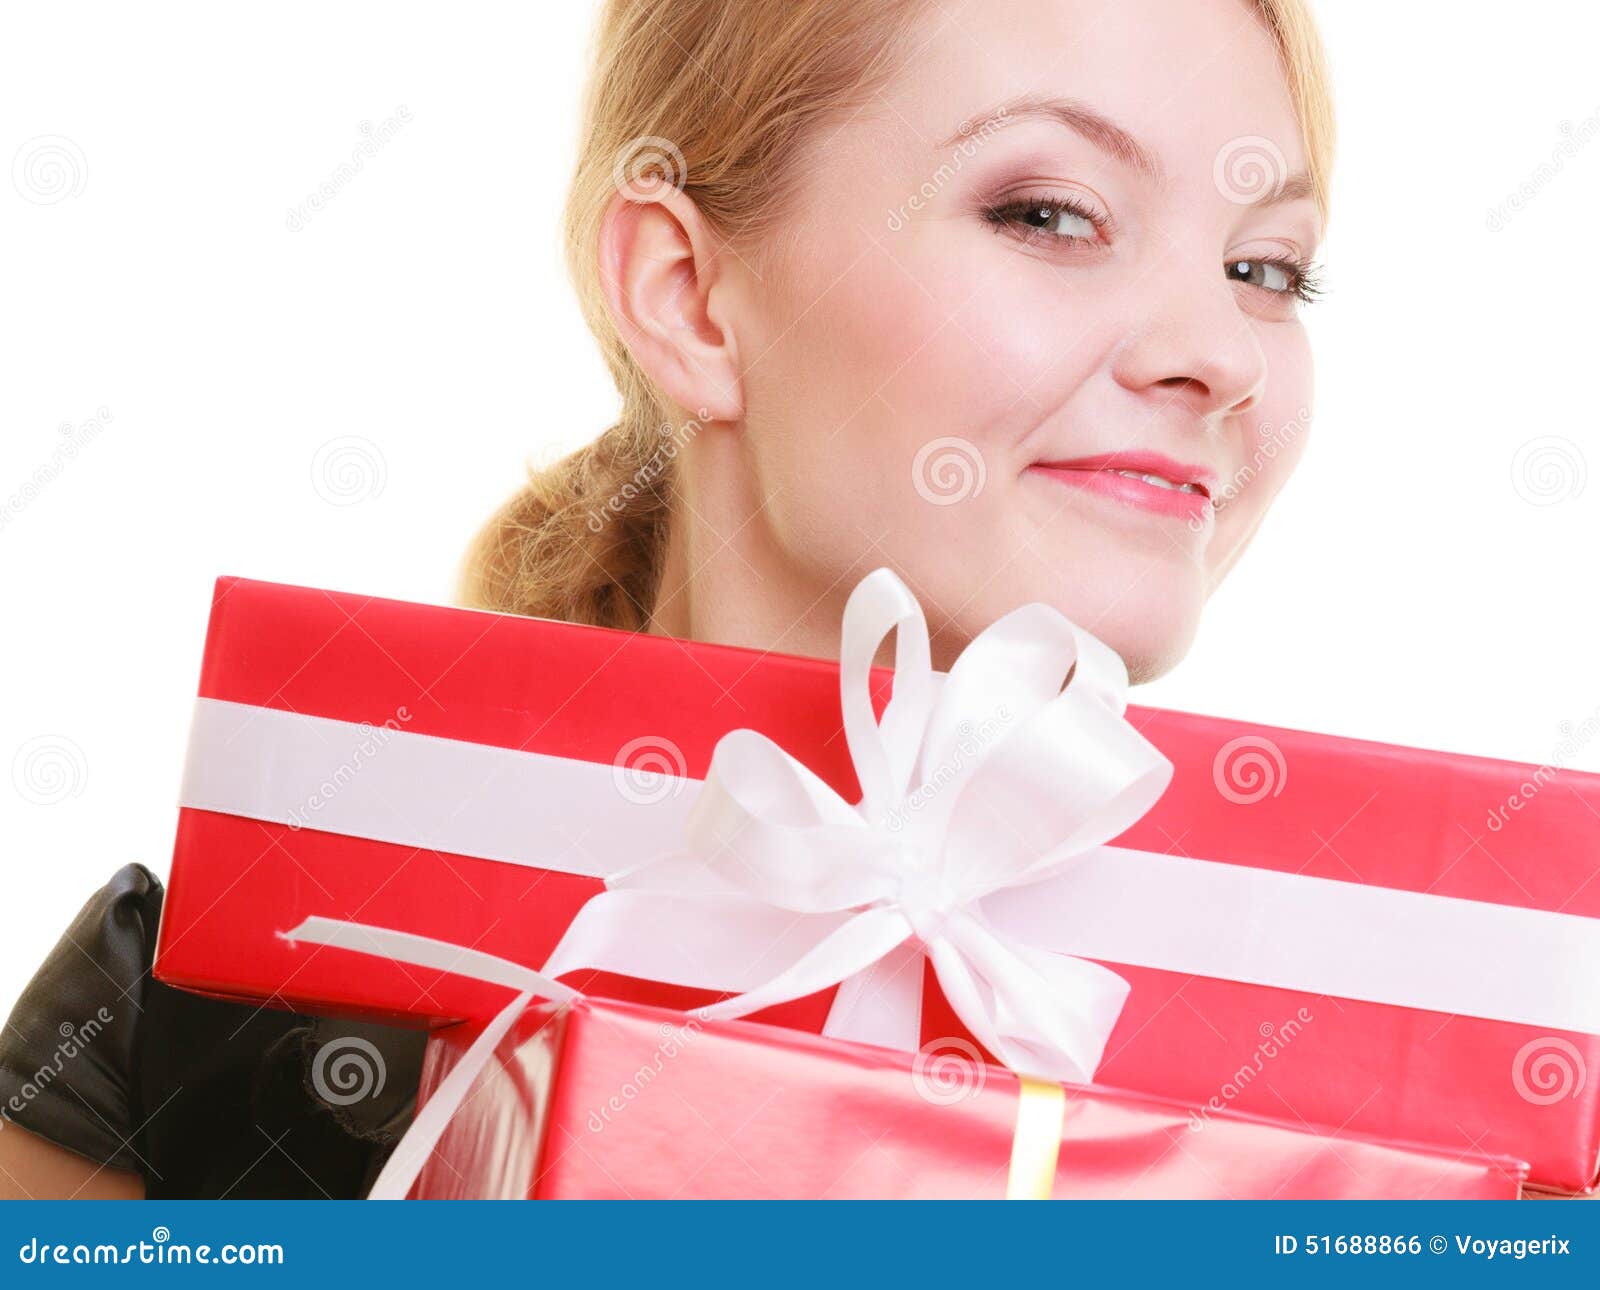 Holidays love happiness concept - girl with gift boxes - holidays-love-happiness-concept-girl-gift-boxes-people-celebrating-beautiful-blonde-red-isolated-51688866